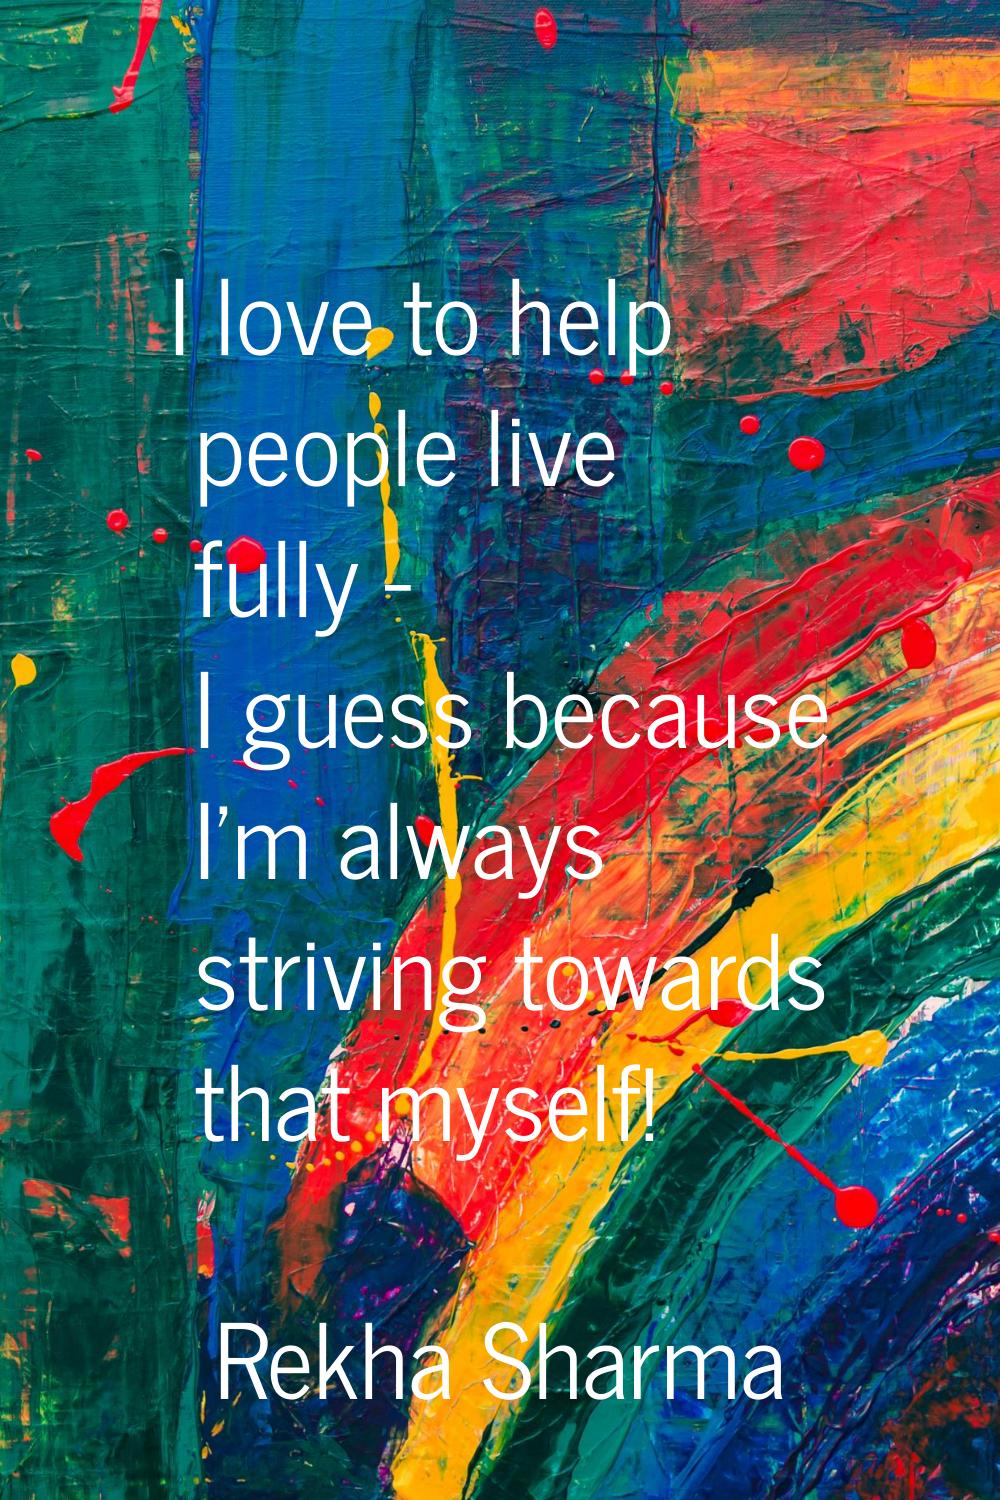 I love to help people live fully - I guess because I'm always striving towards that myself!